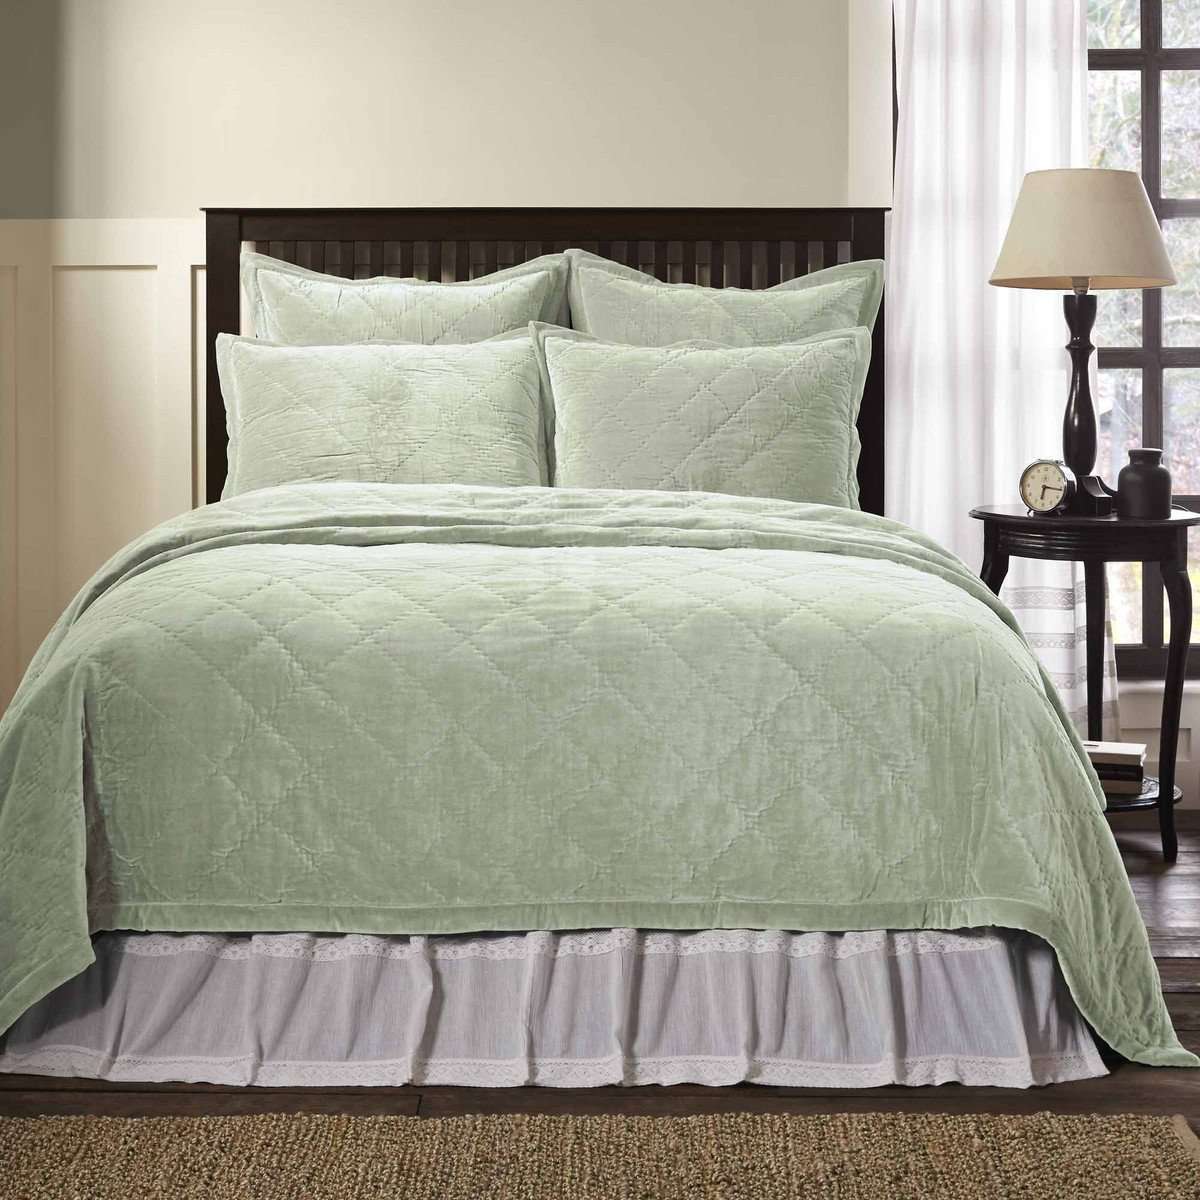 Lydia Sea Glass Queen Quilt 92Wx92L VHC Brands online